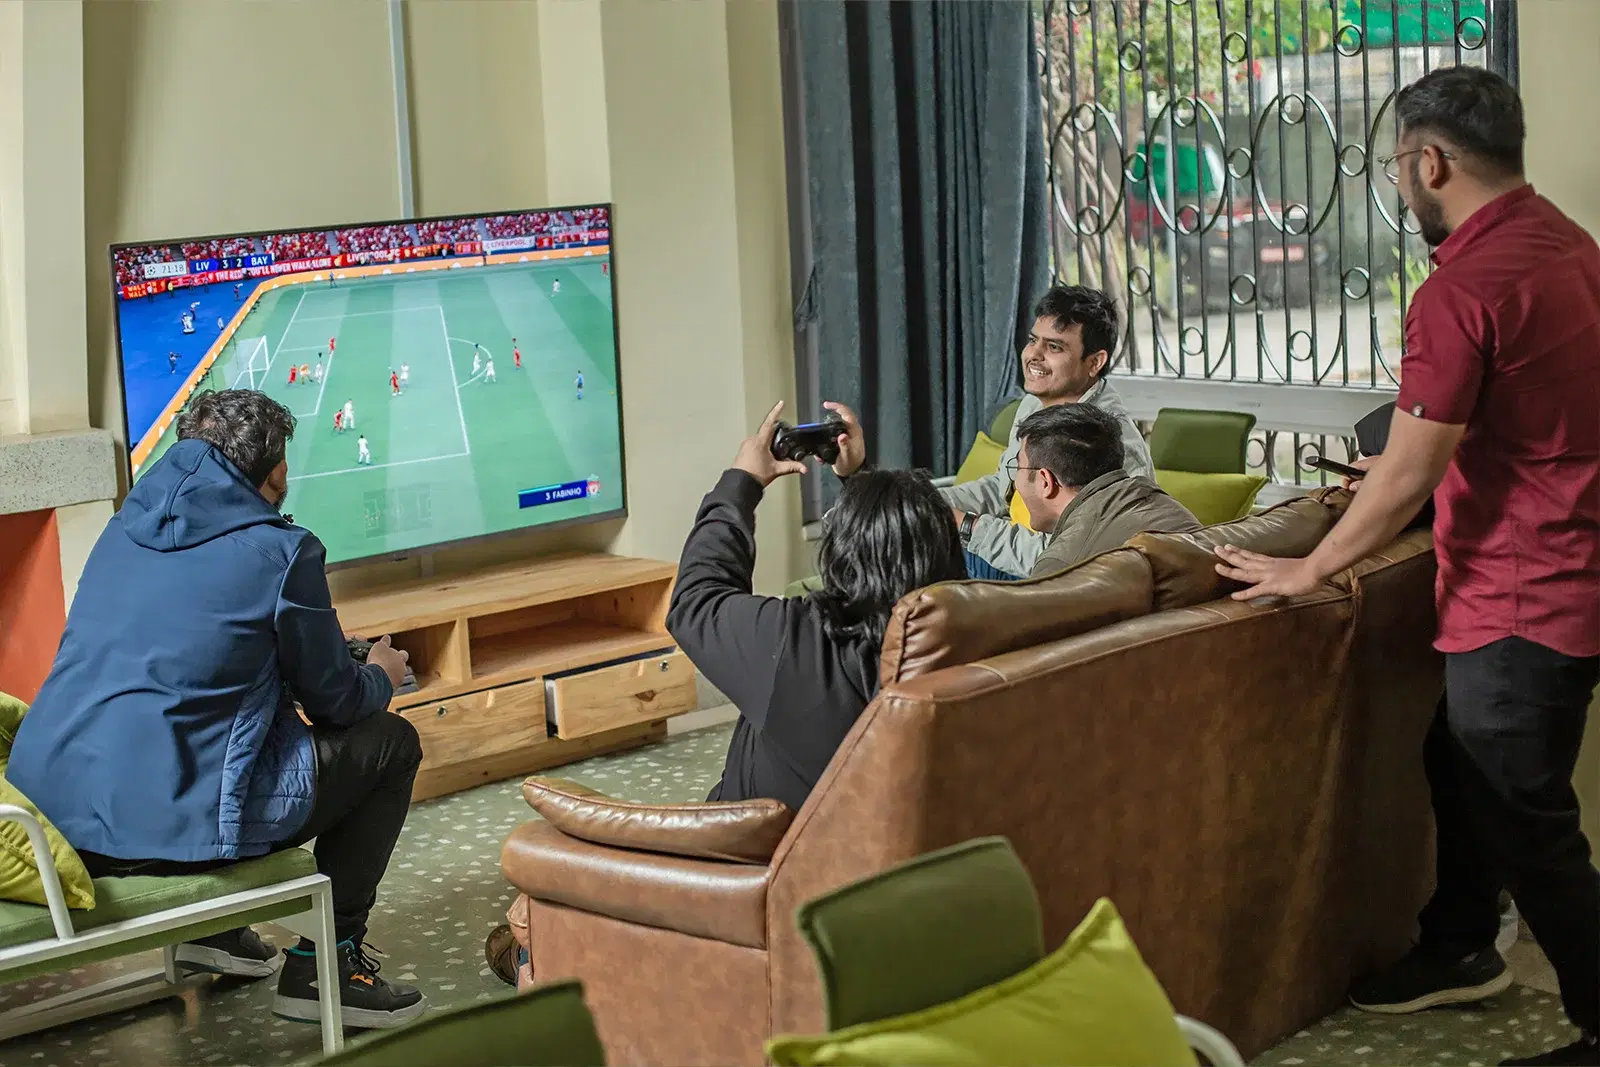 Five employees playing FIFA on a large office screen: one standing, four seated on a couch.